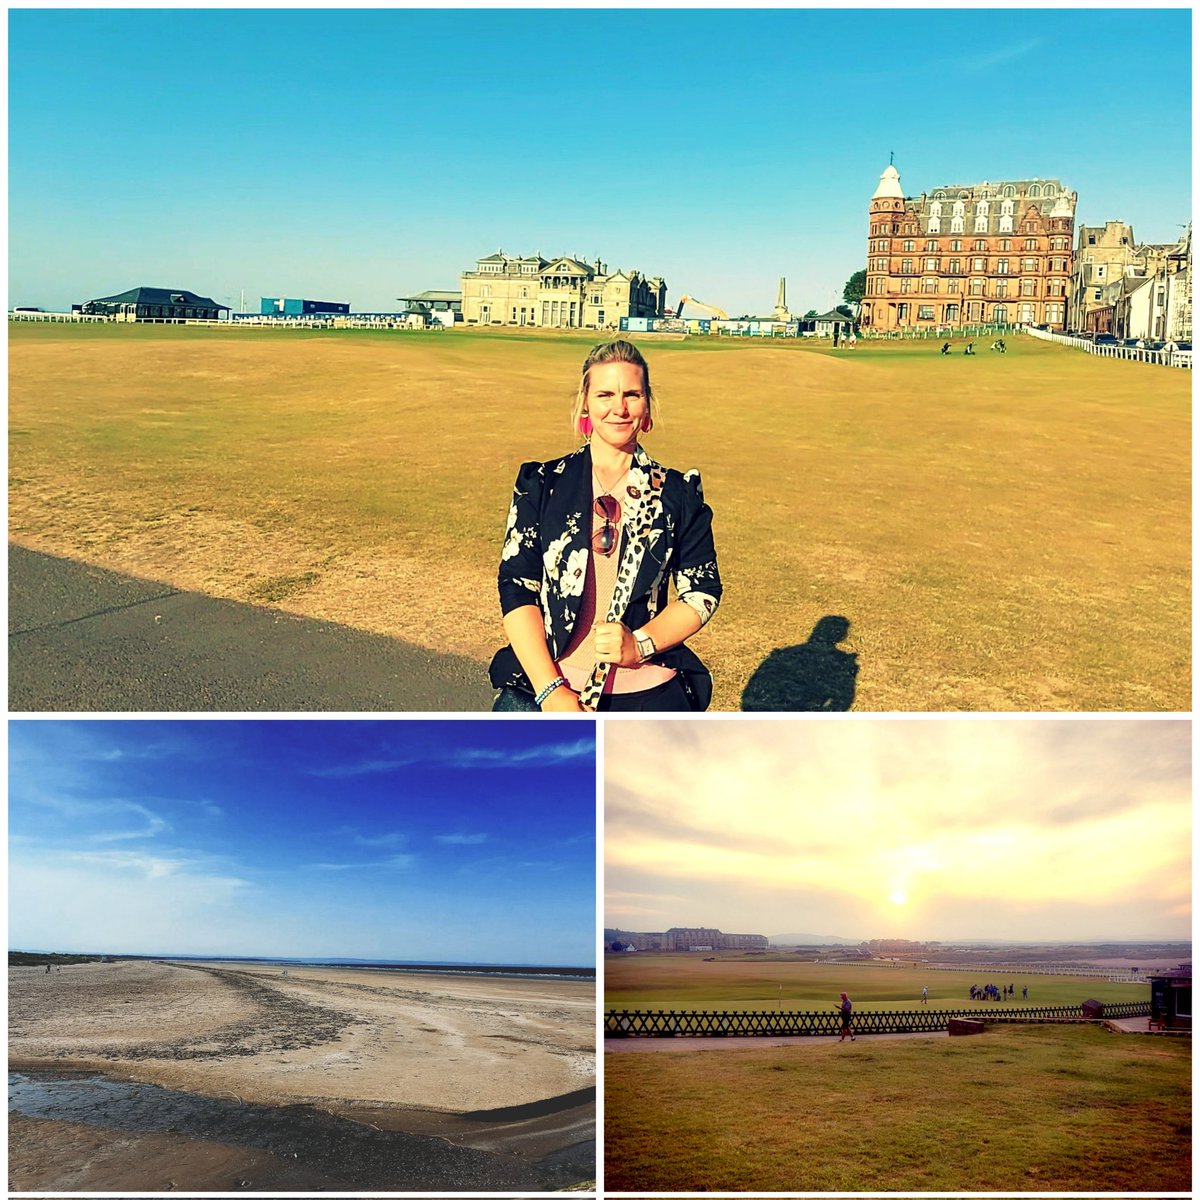 Scotland you have been amazing! 🏴󠁧󠁢󠁳󠁣󠁴󠁿🏴󠁧󠁢󠁳󠁣󠁴󠁿 Been fantastic catching up with old friends....playing @MonifiethLinks and visiting the home of golf @TheHomeofGolf @RandA ... what a stunning place 🙏 💙 🤍 ....just a 10 hour drive home now! #wasworthit #homeofgolf #scotlandroadtrip 🏴󠁧󠁢󠁳󠁣󠁴󠁿